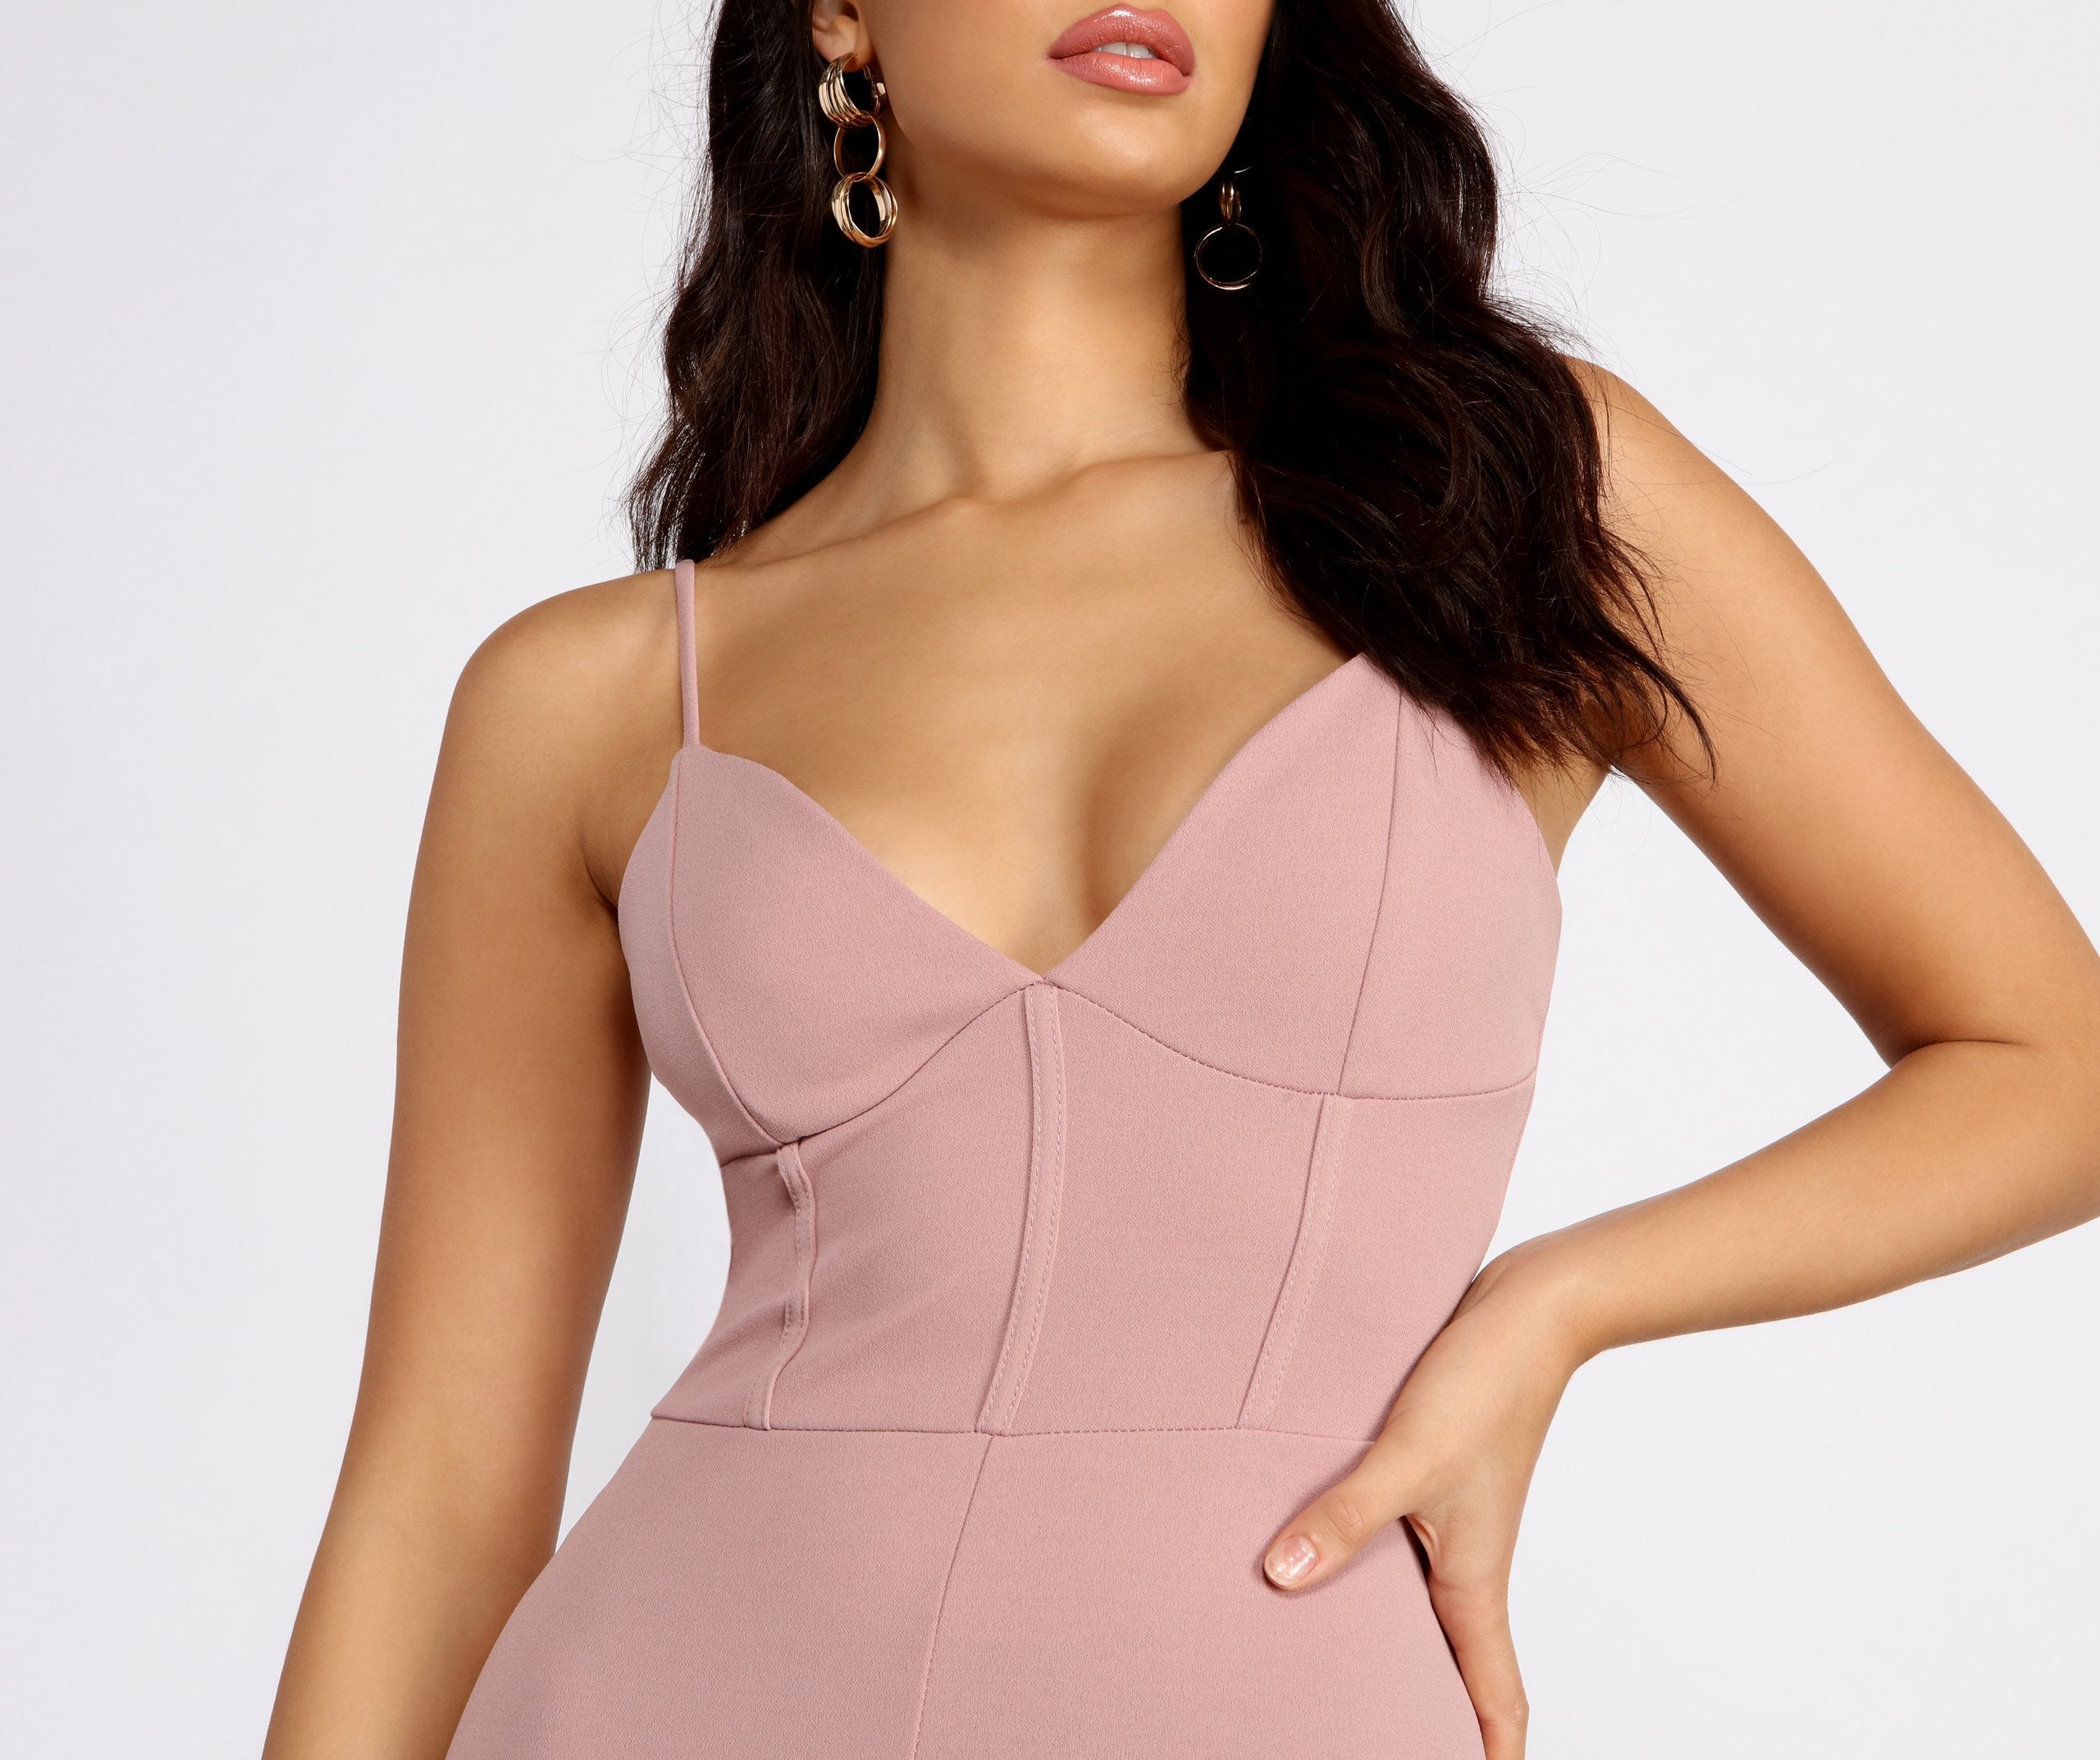 Made You Look Corset Detail Jumpsuit